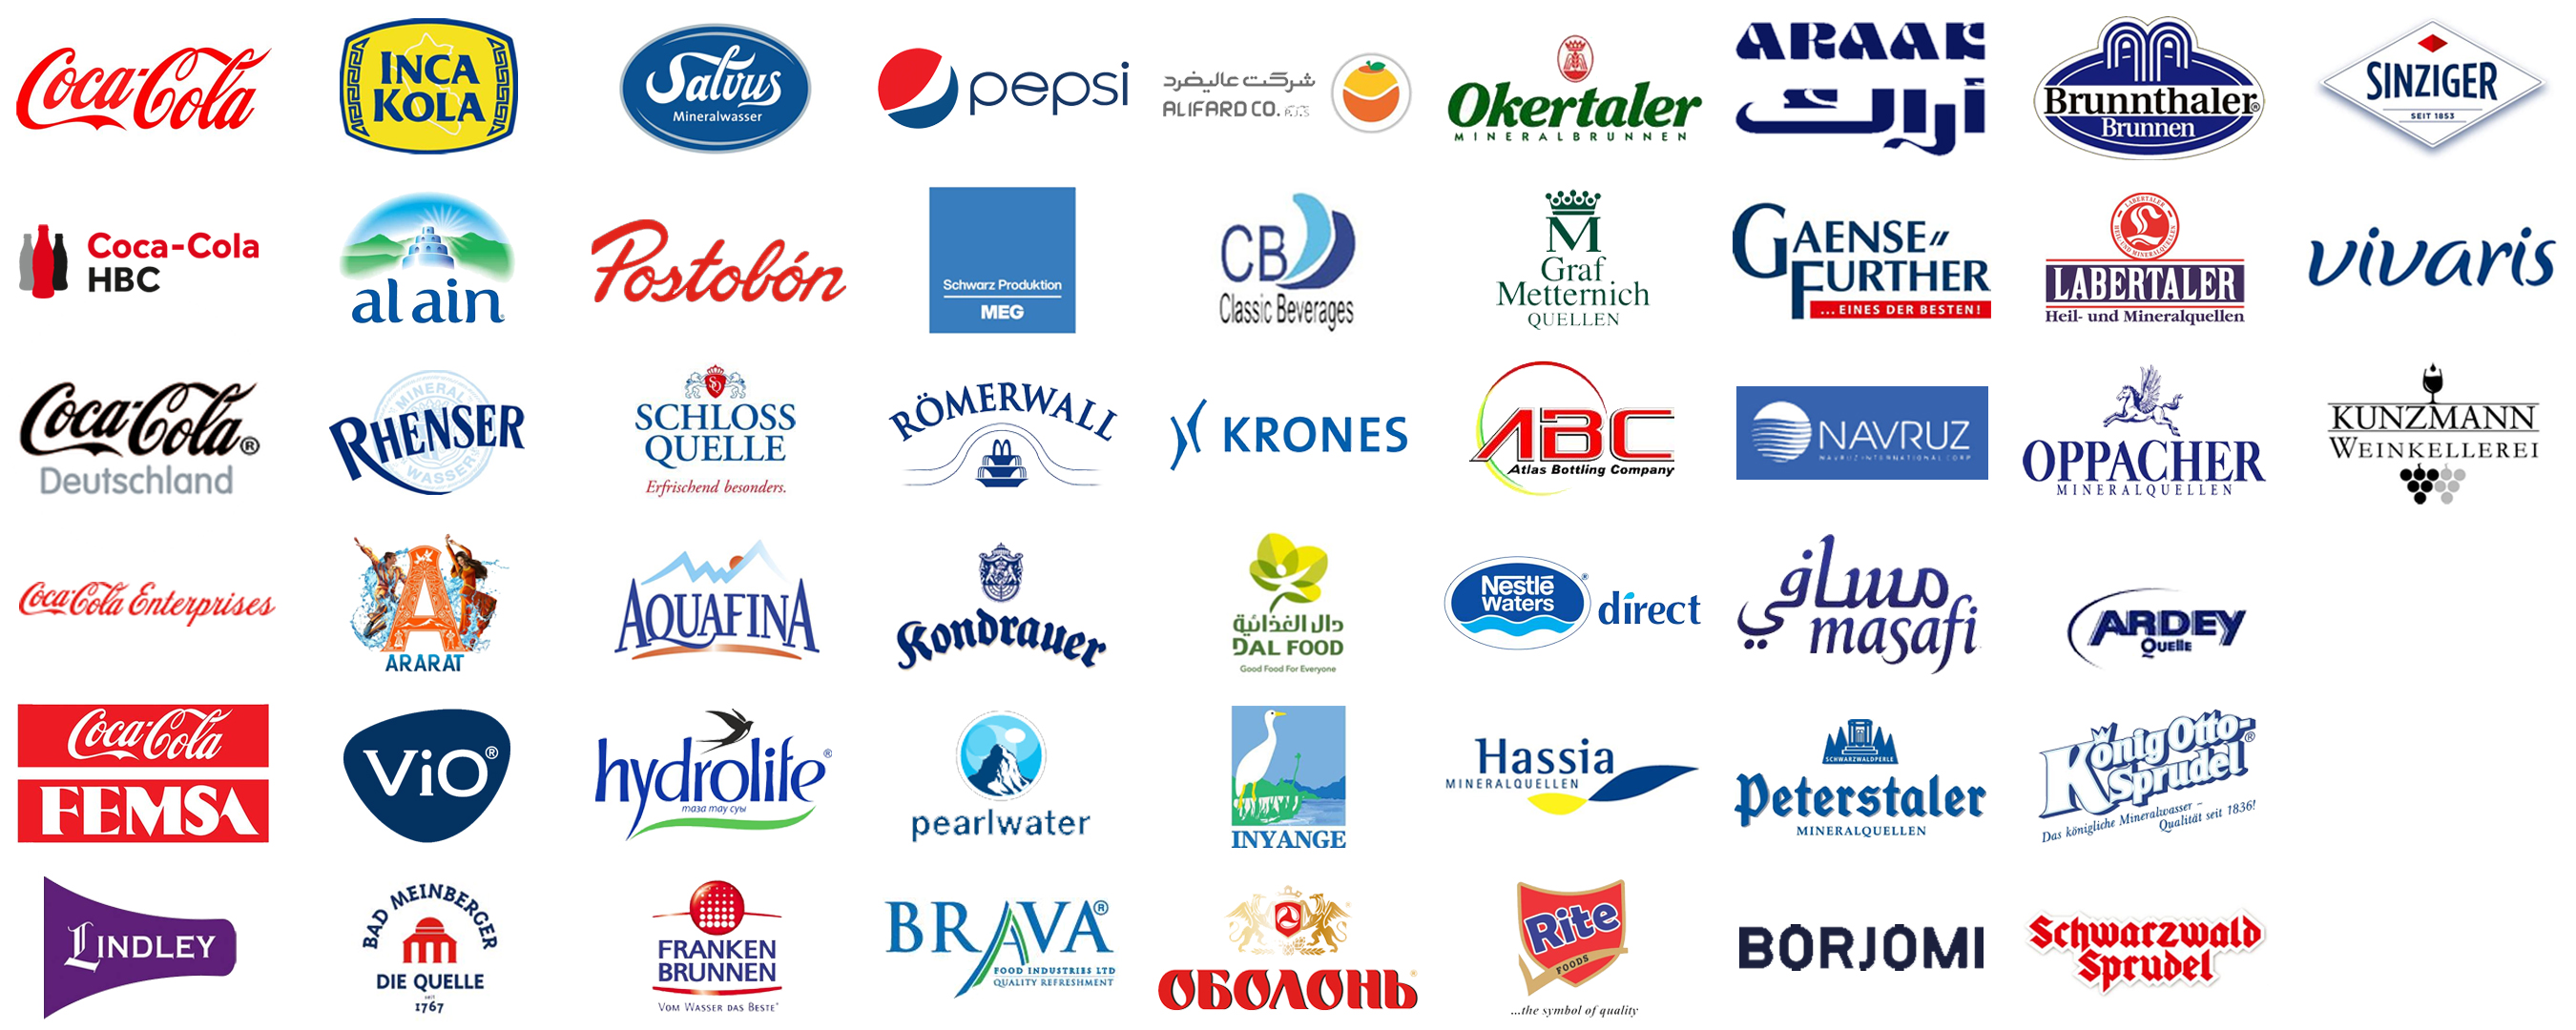 Our customers and partners in the non-alcoholic beverage industry